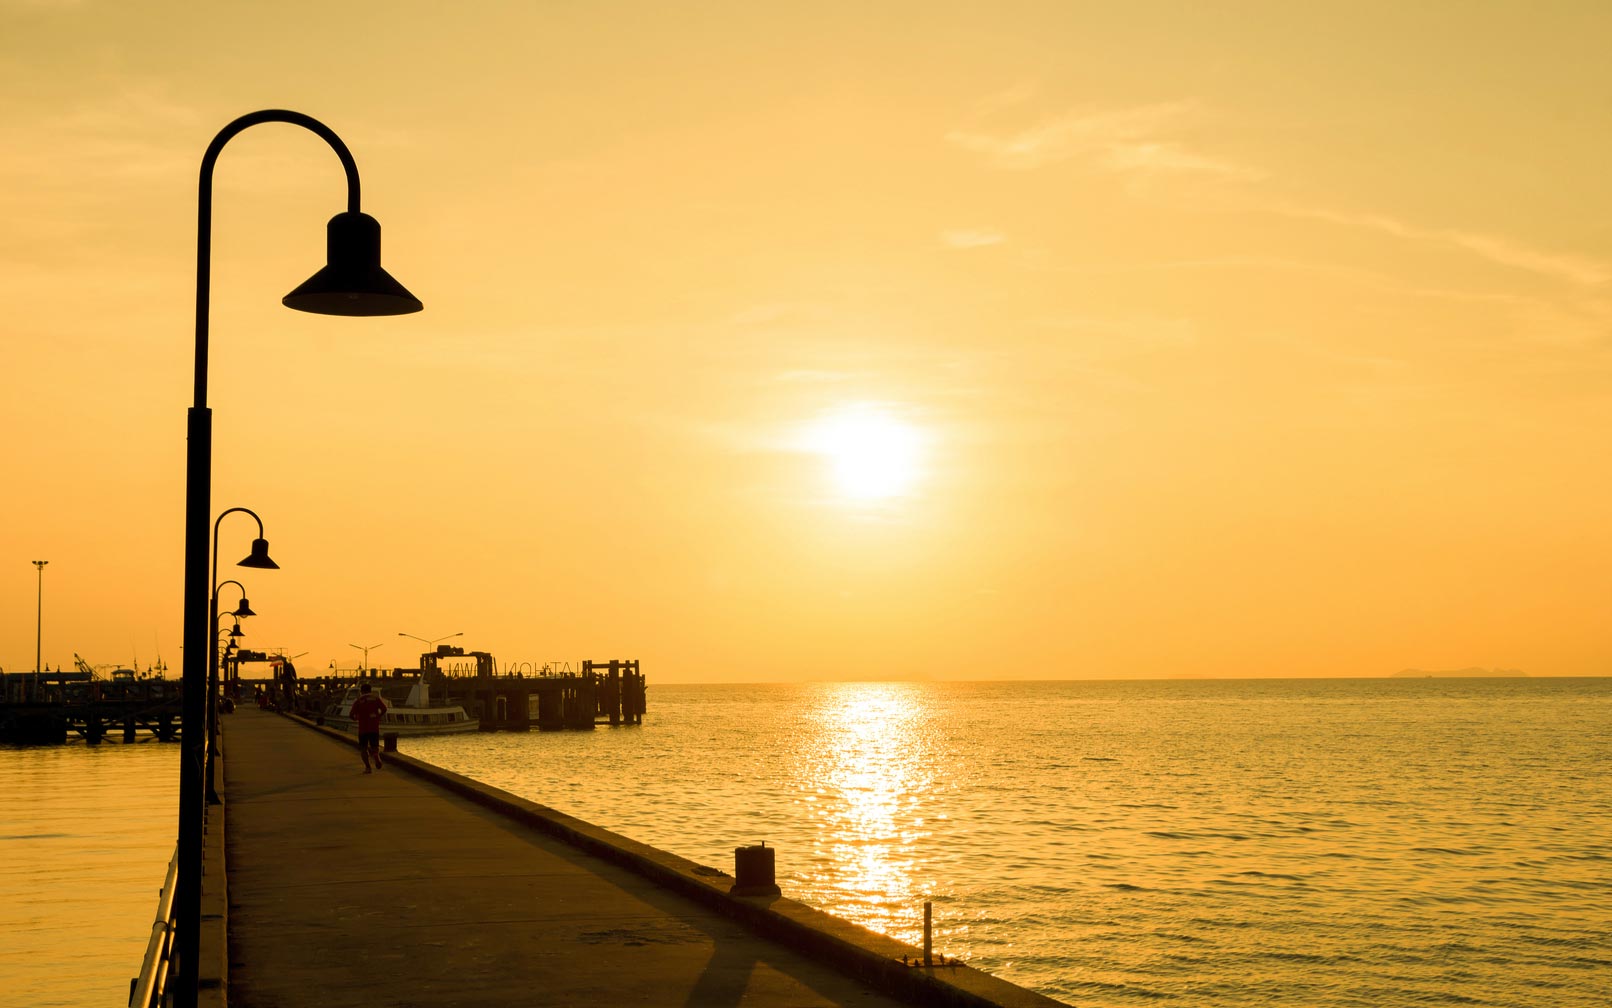 The Best Coastal Lighting Fixtures: What Lighting Fixtures Can Survive Harsh Coastal Climates?